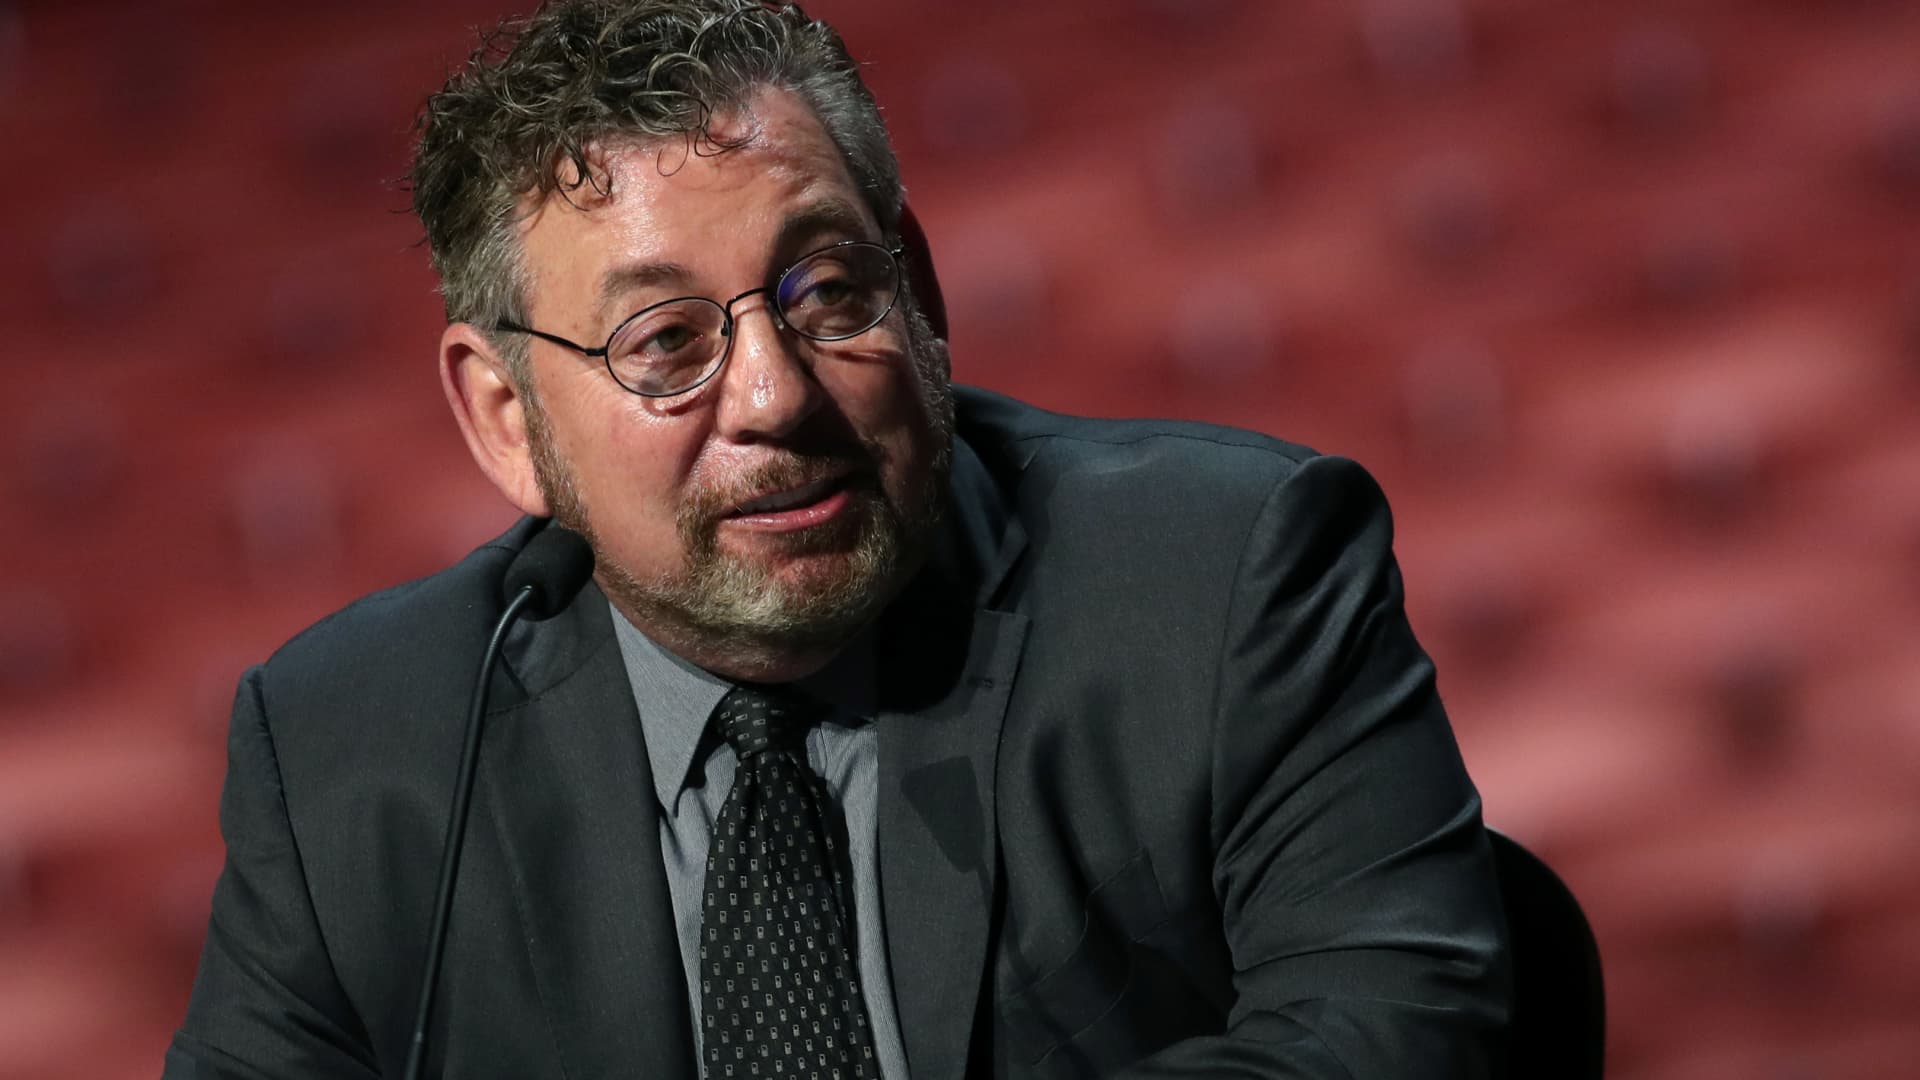 James Dolan Executive Chairman and CEO of Madison Square Garden Entertainment, speaks at a news conference from the stage at Radio City Music Hall in New York, May 17, 2021.